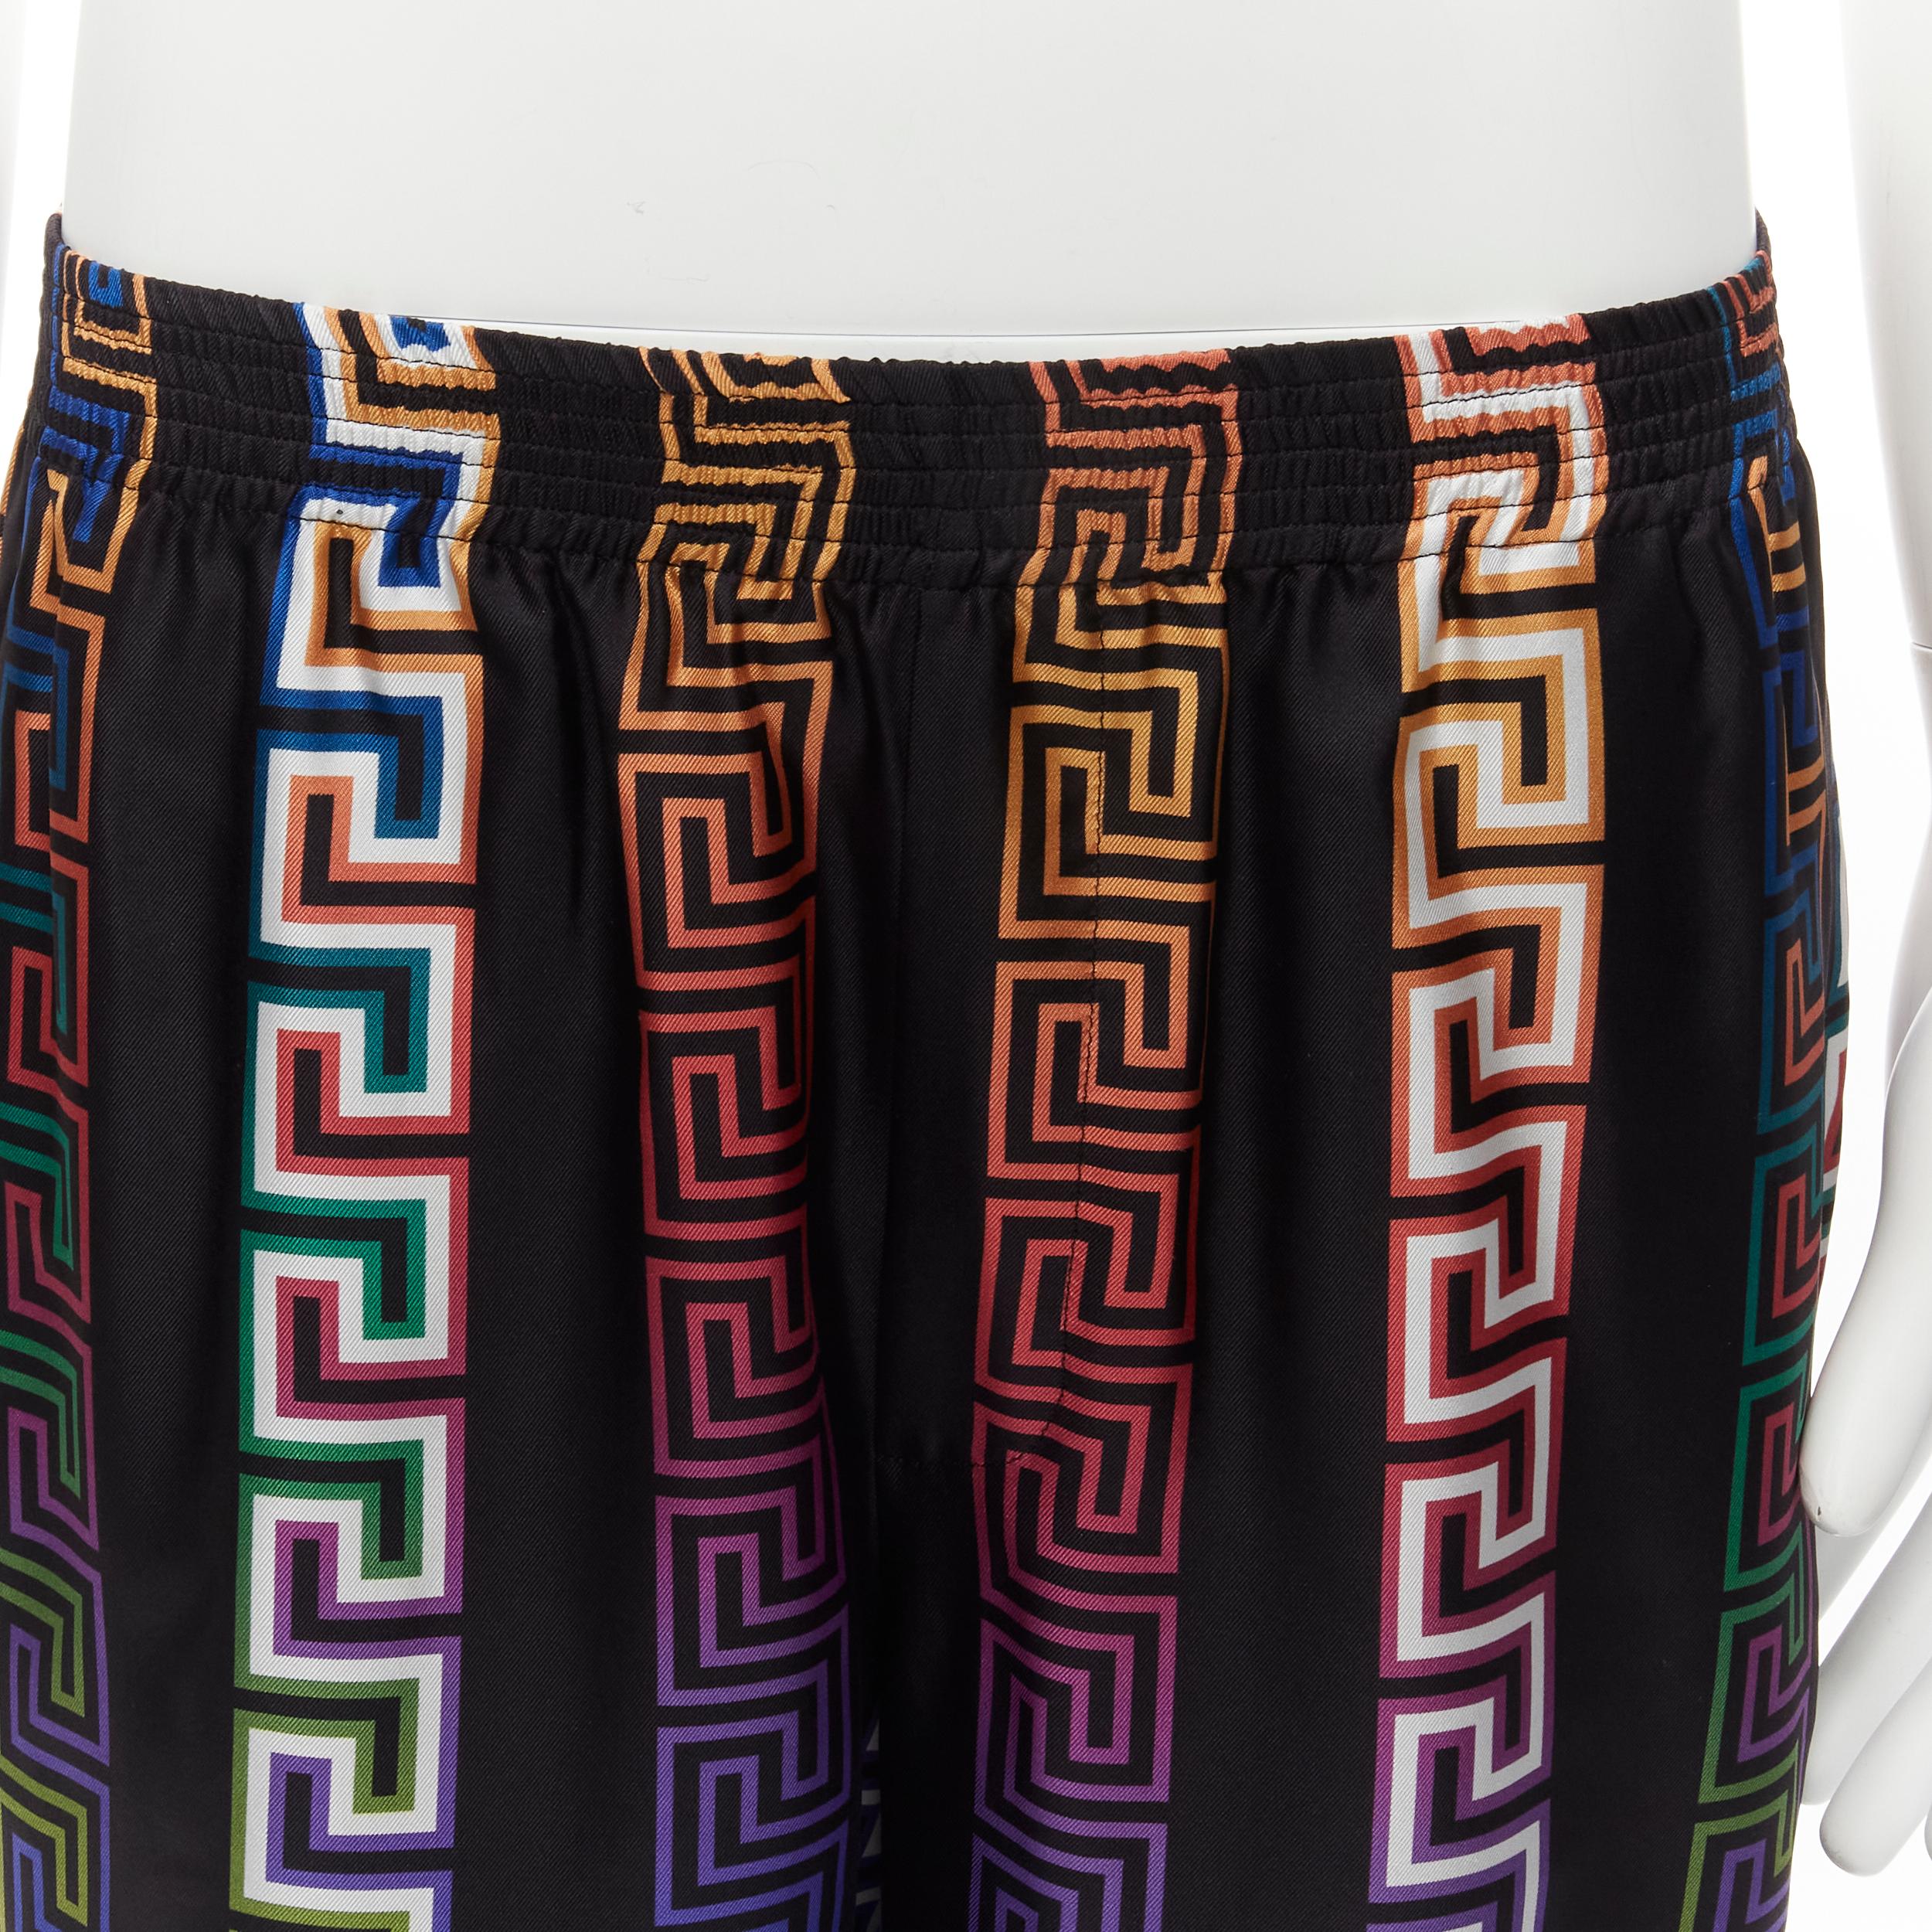 new VERSACE 2021 Runway Neon Greca black college fit silk twill shorts IT48 M

Reference: TGAS/C01809

Brand: Versace

Designer: Donatella Versace

Model: A86243 1A00967 5B020

Collection: 2021 - Runway

Material: Silk

Color: Multicolour

Pattern: